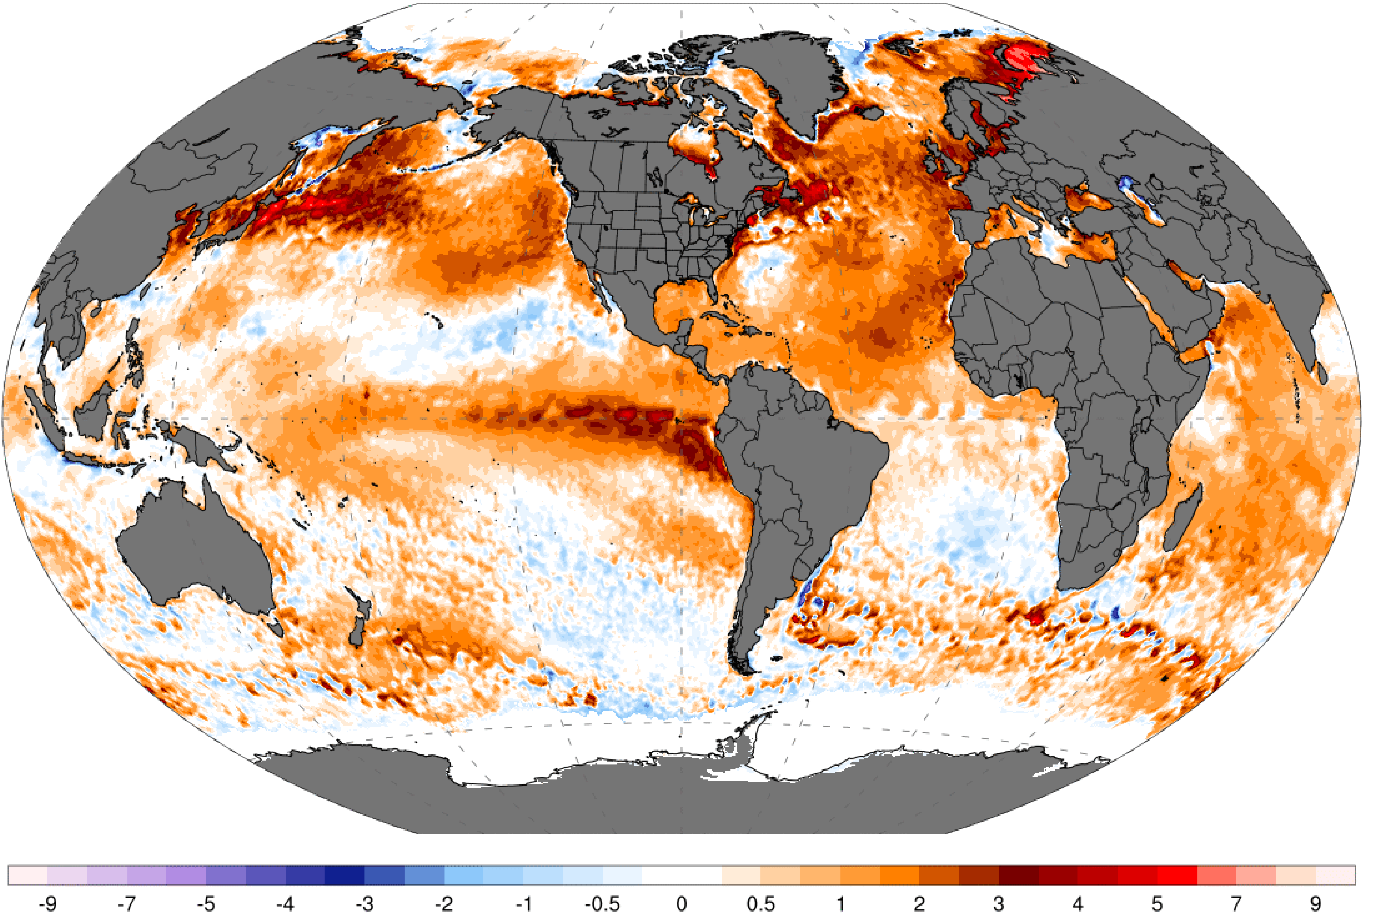 Enlarged view: World map showing the different surface temperatures of the oceans.